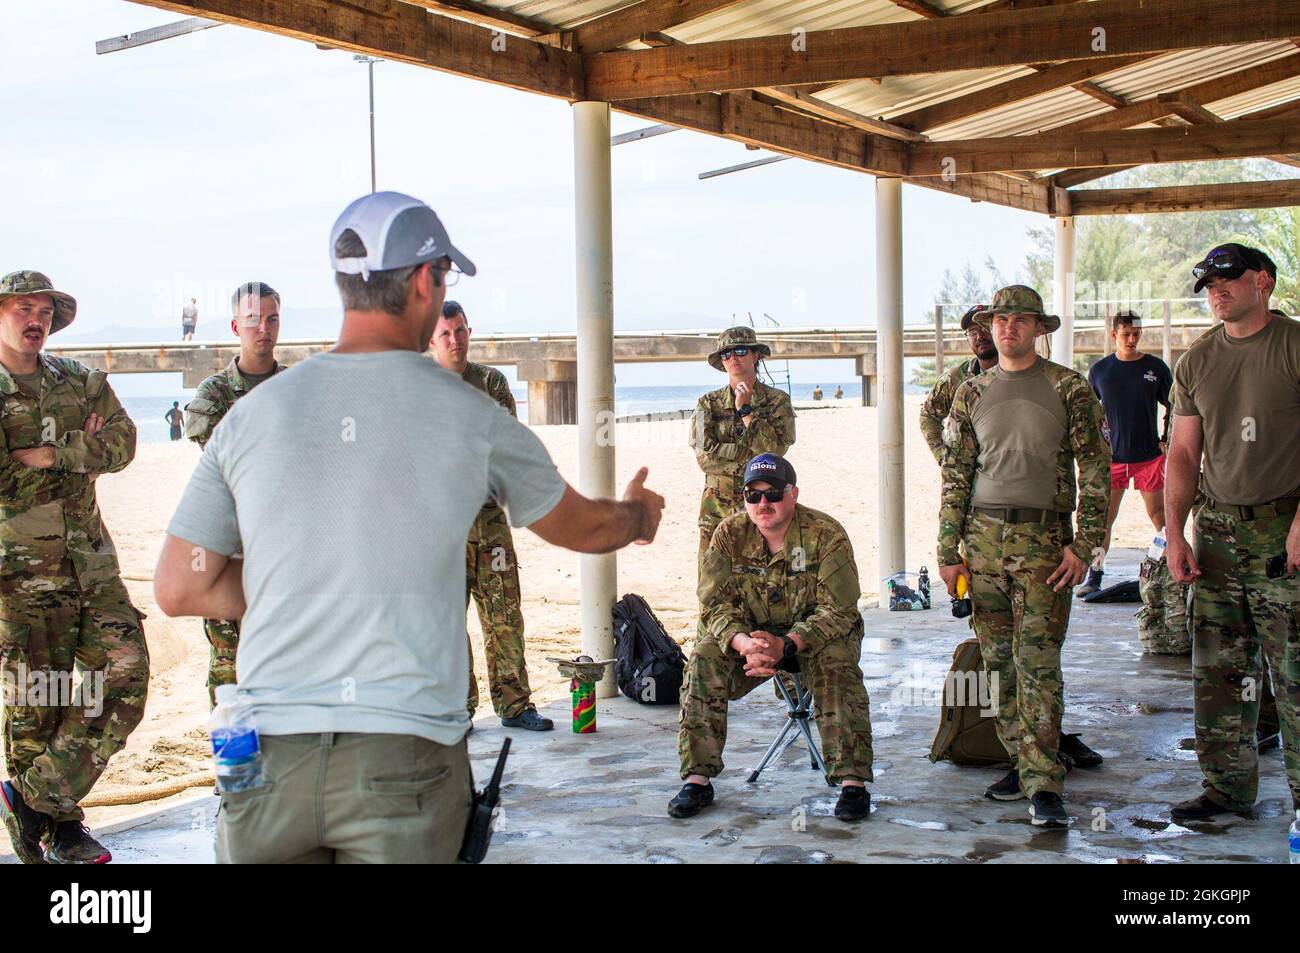 U.S. Army Major Brian Molloy, a cast master assigned to Joint Task Force-Bravo, briefs service members on in-flight commands for helocast during overwater survival training at Puerto Castilla, Honduras, April 17, 2021. The training is used to certify aircrews on overwater flight operations, and individual and crew emergency egress, ditching, water survival, passenger procedures and water recovery operations. Stock Photo